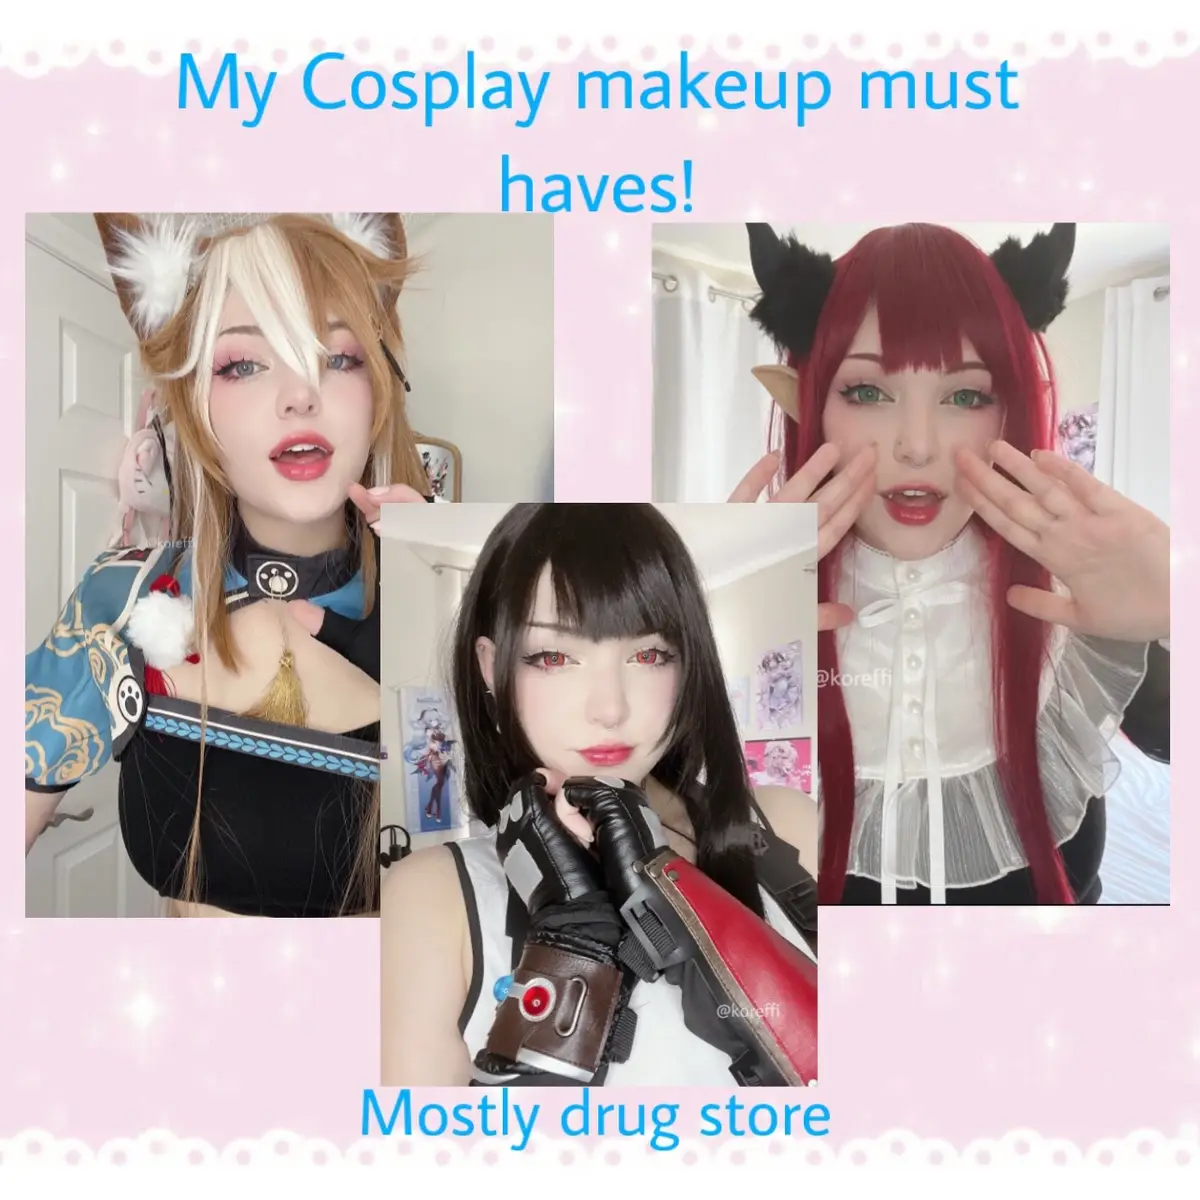 Not too many people have asked but i love makeup so thought id share especially sincd ive found so much products that work well for me! #cosplay #cosplayer #animecosplay #cosplaymakeup #makeup #MakeupRoutine #makeupgrails 